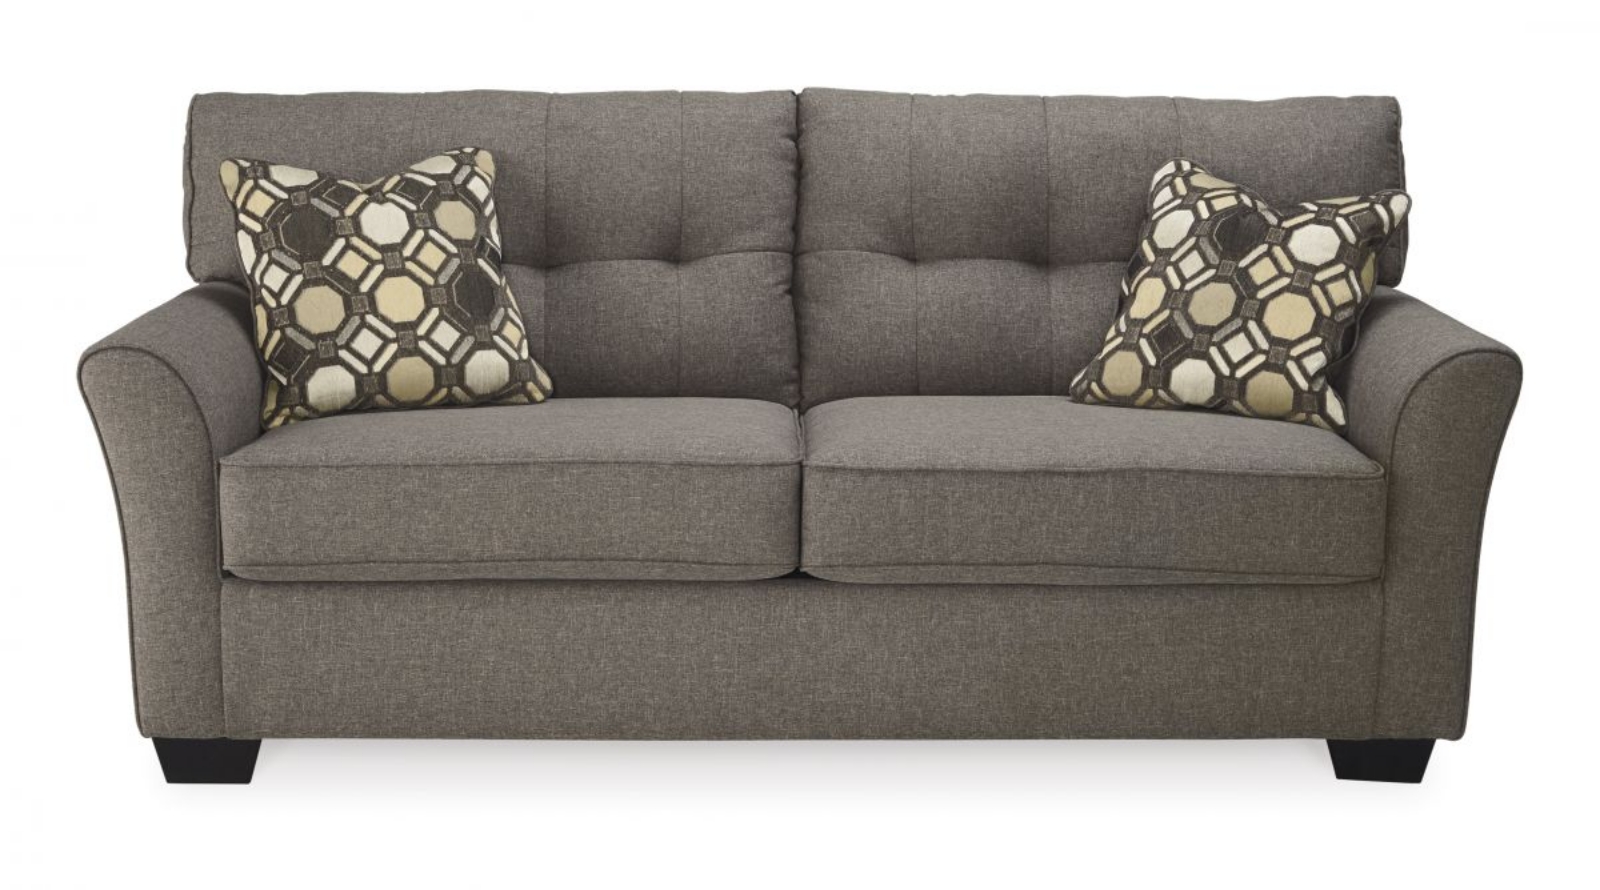 Picture of Tibbee Sofa